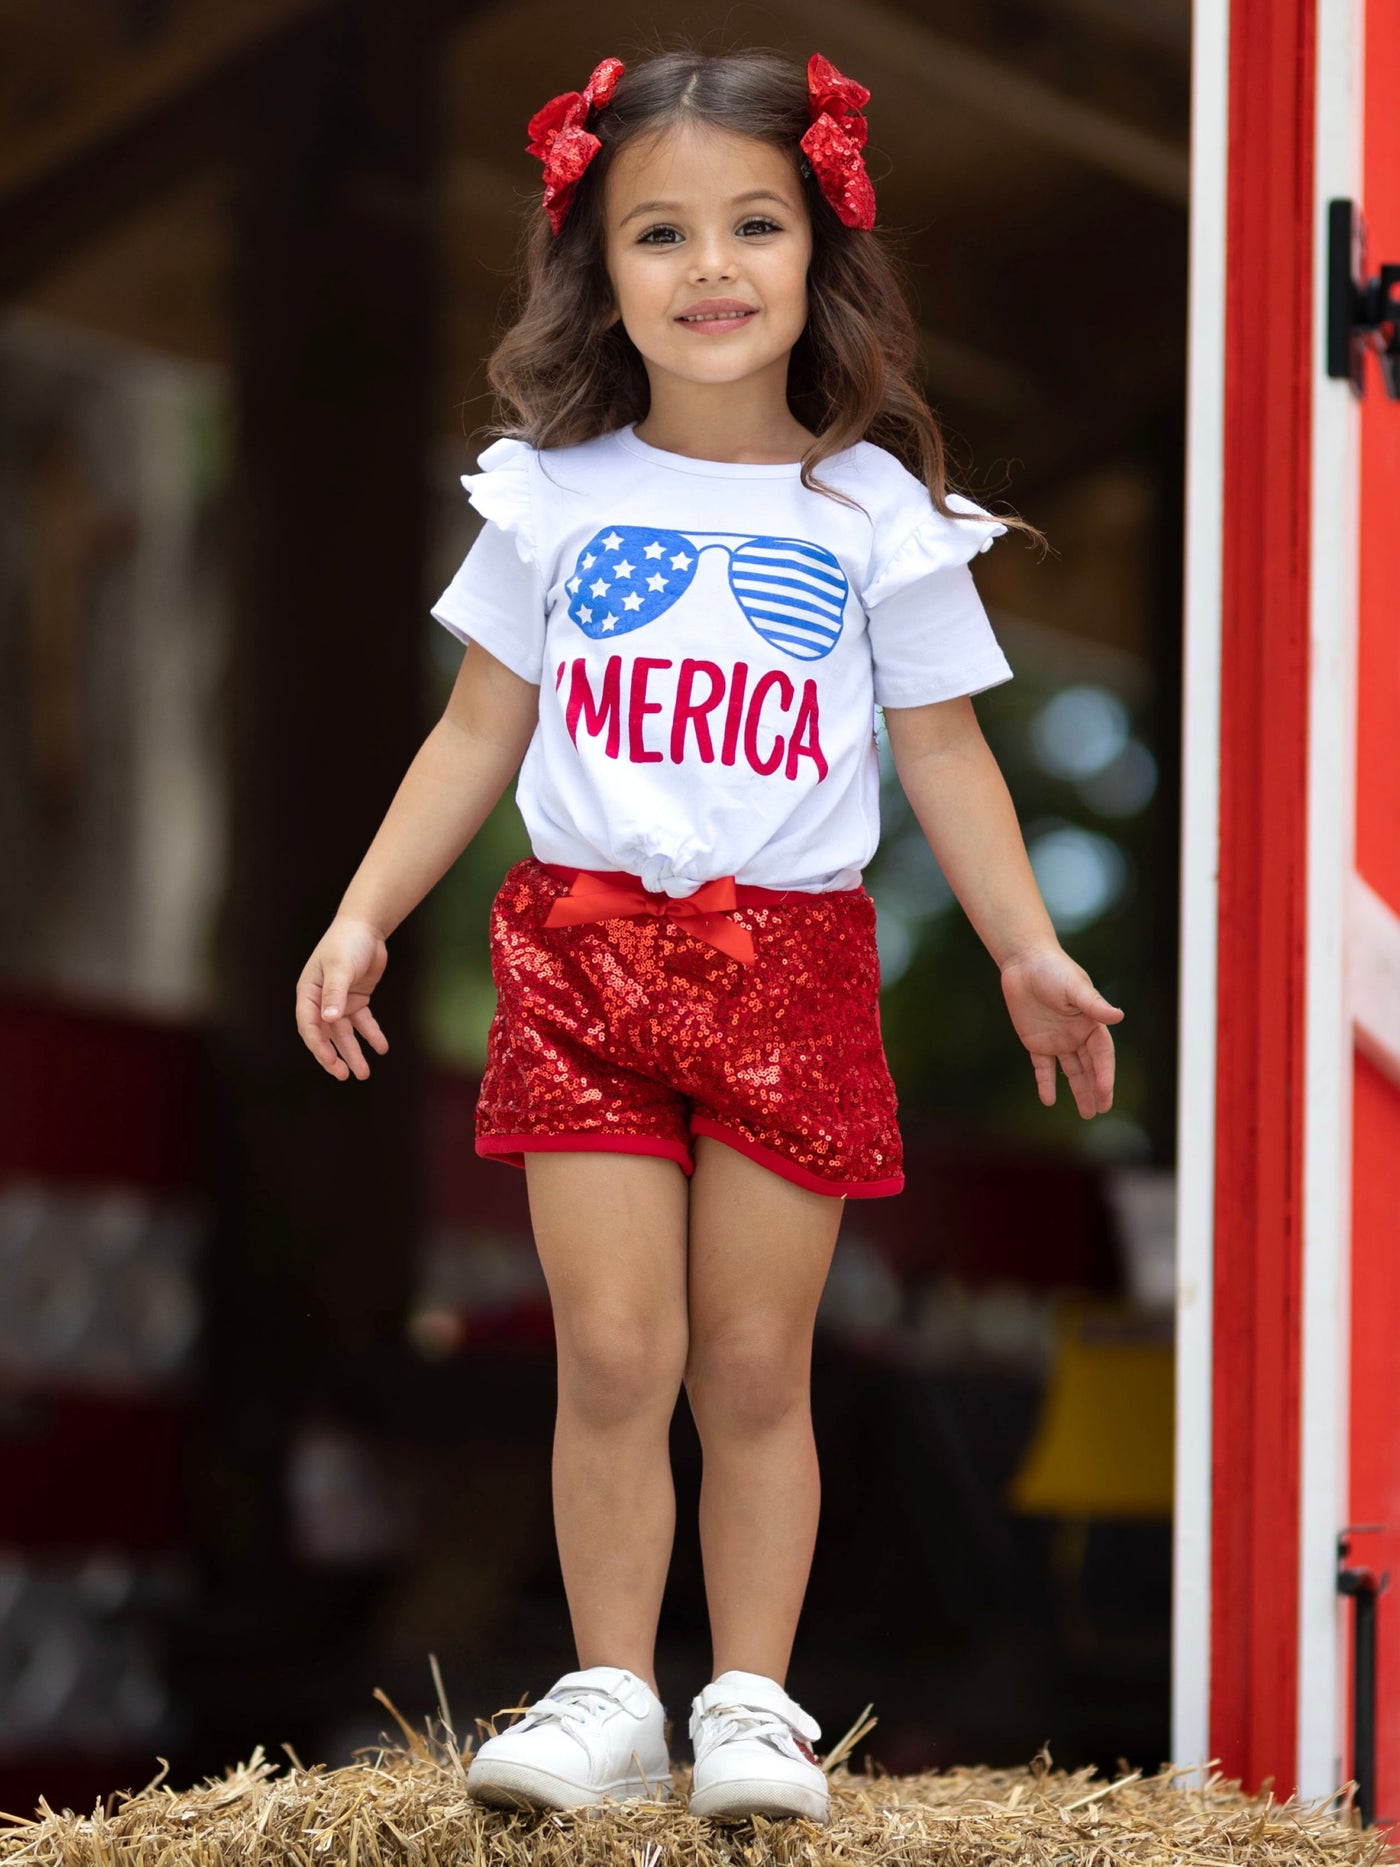 Mia Belle Girls Merica Top and Sequin Shorts Set | 4th of JulySets